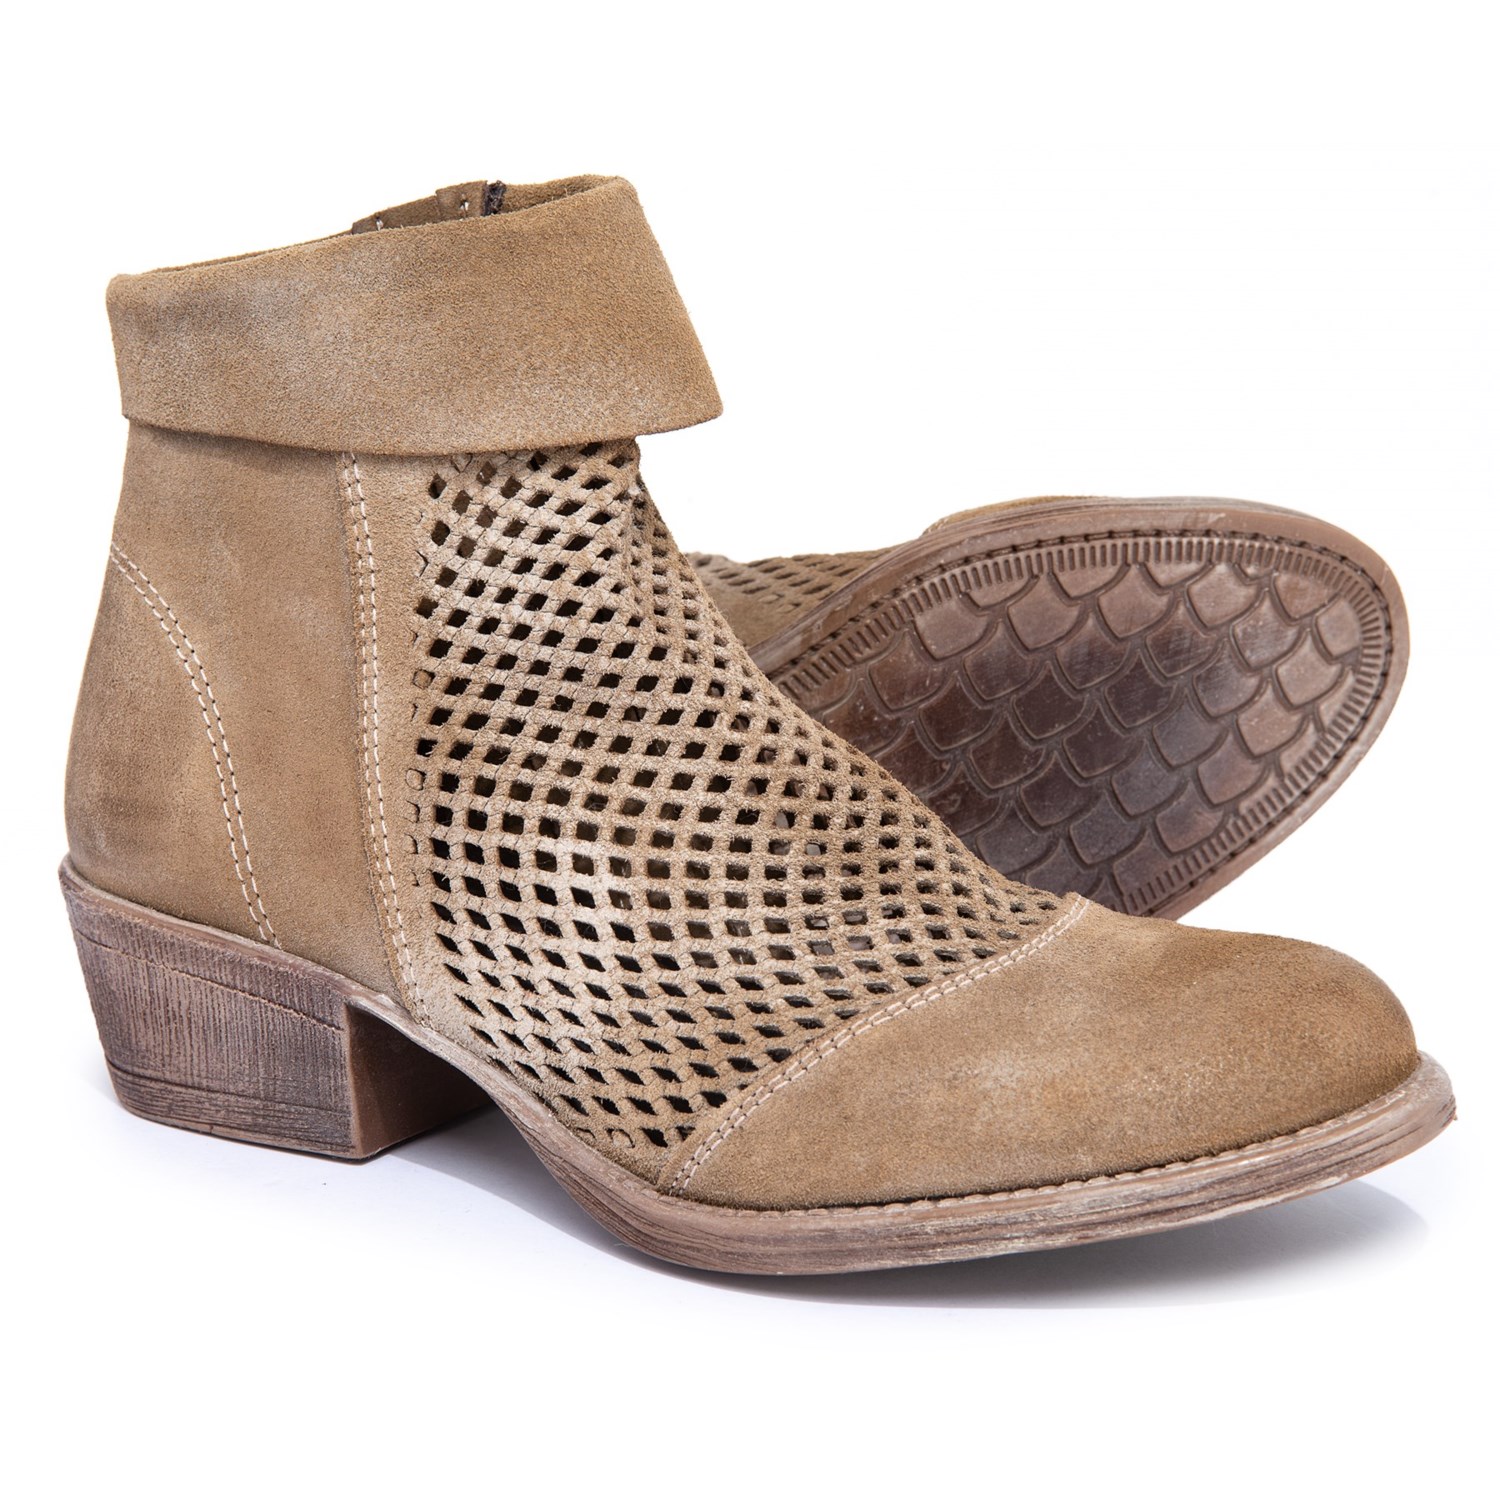 ROAN Houlton Booties (For Women) - Save 78%